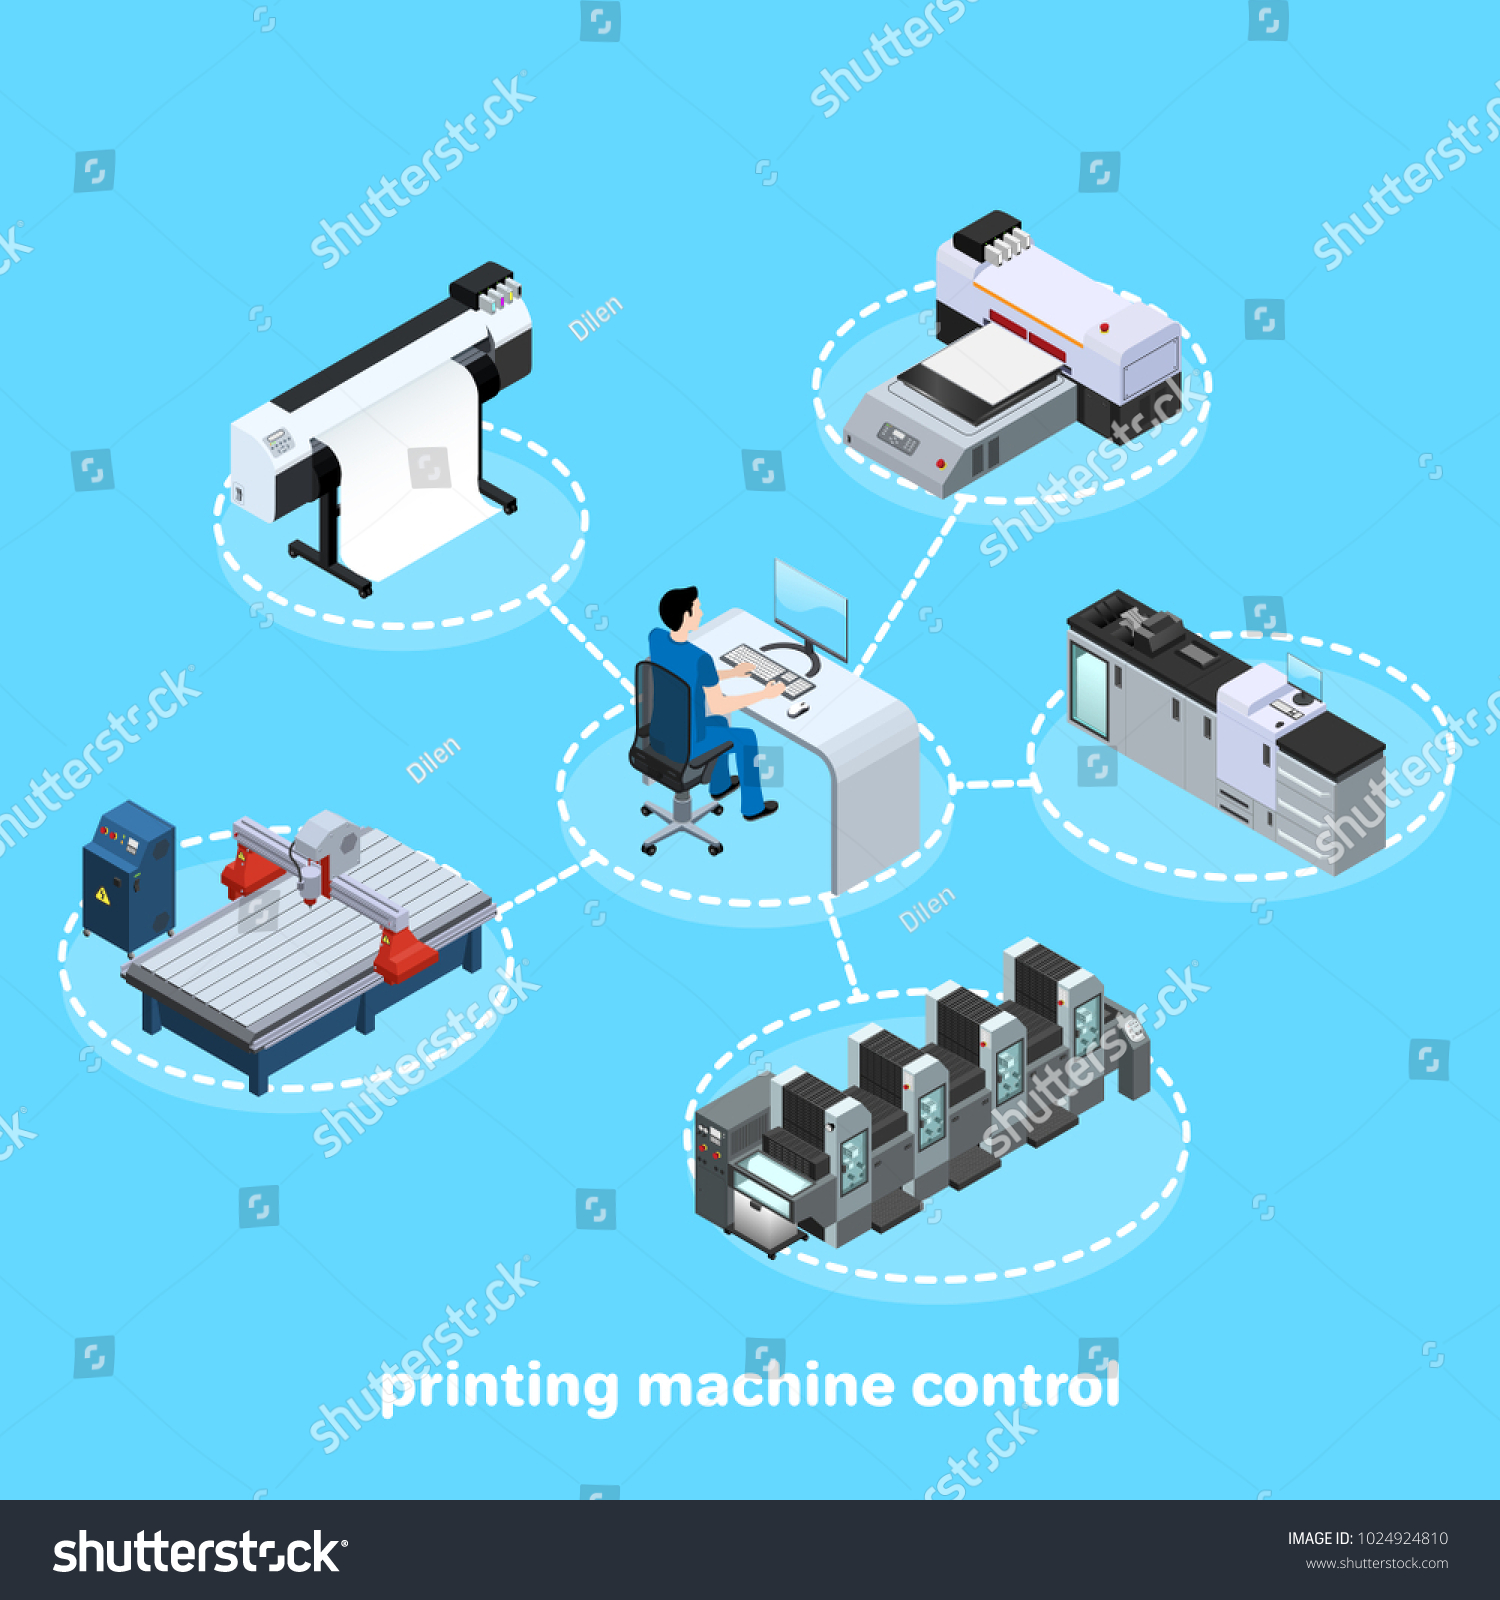 SVG of printing machine control, Professional equipment for various types of printing in the field of advertising, offset and digital as well as inkjet and ultraviolet printing, isometric image svg